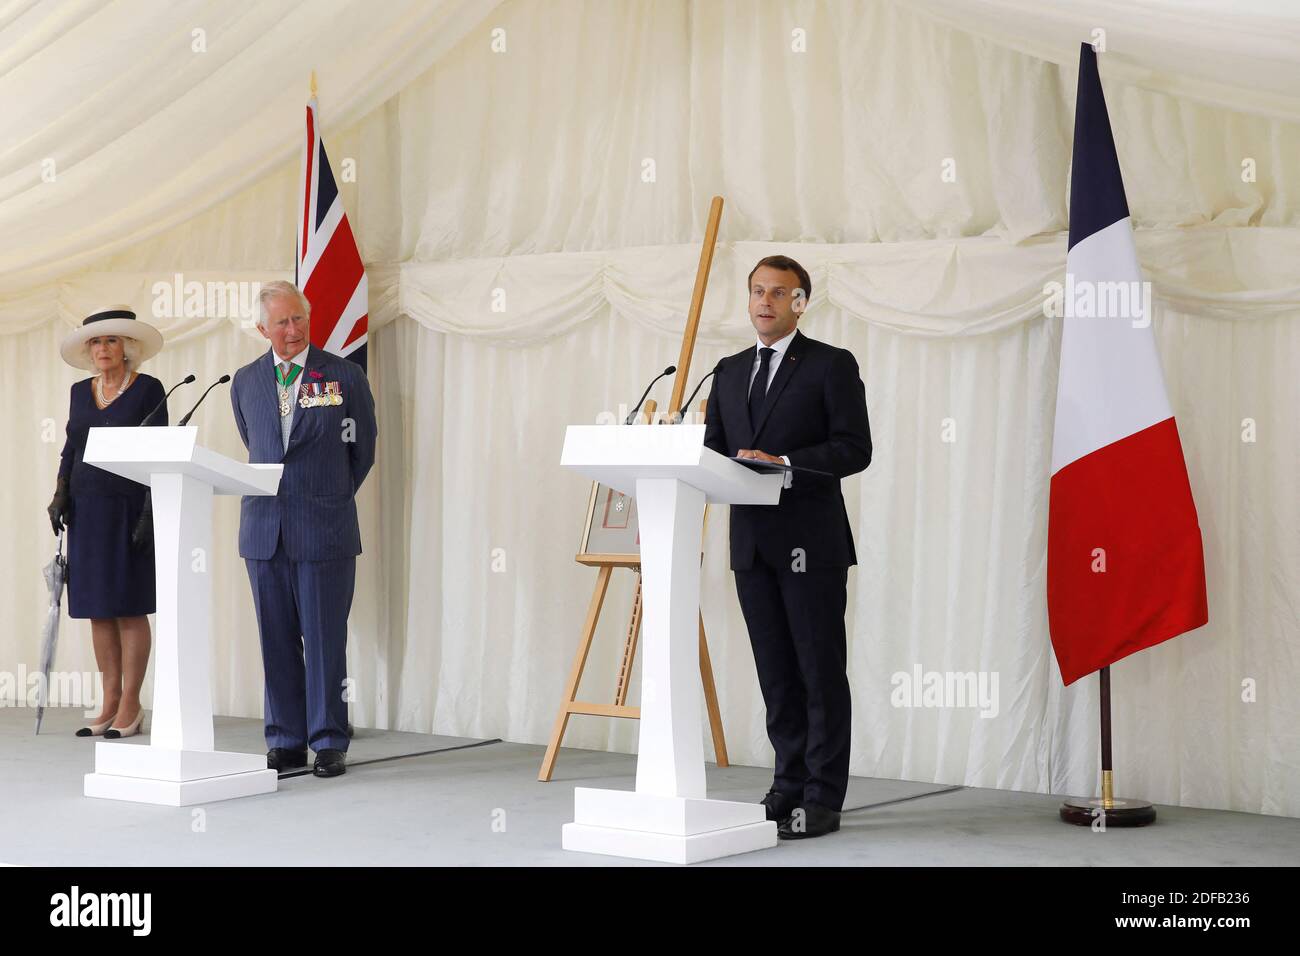 French President Emmanuel Macron (R) speaks at a wreath-laying event at Carlton Gardens in central London on June 18, 2020 with Britain's Prince Charles, Prince of Wales (2L) and Britain's Camilla, Duchess of Cornwall (L) during a visit to mark the anniversary of French president Charles de Gaulle's appeal to French people to resist the Nazi occupation during WWII. - Macron visited London on June 18 to commemorate the 80th anniversary of former French president Charles de Gaulle's appeal to French people to resist the Nazi occupation during World War II. Photo by Tolga AKMEN/Pool/ABACAPRESS.CO Stock Photo